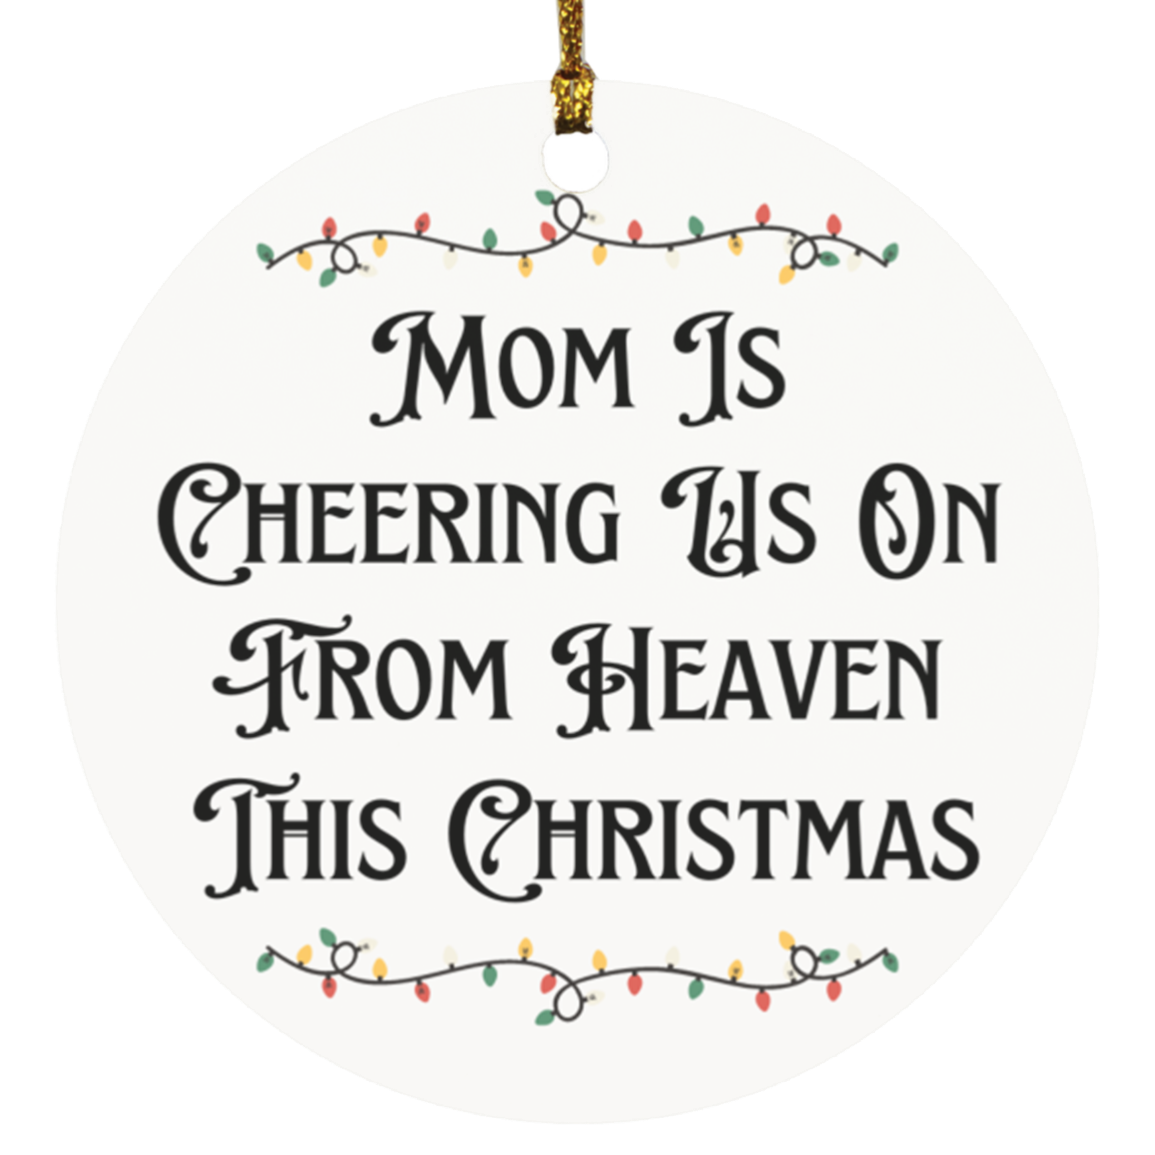 Mom In Heaven Christmas Ornament, Mother Memorial for Christmas, Loss of Mom